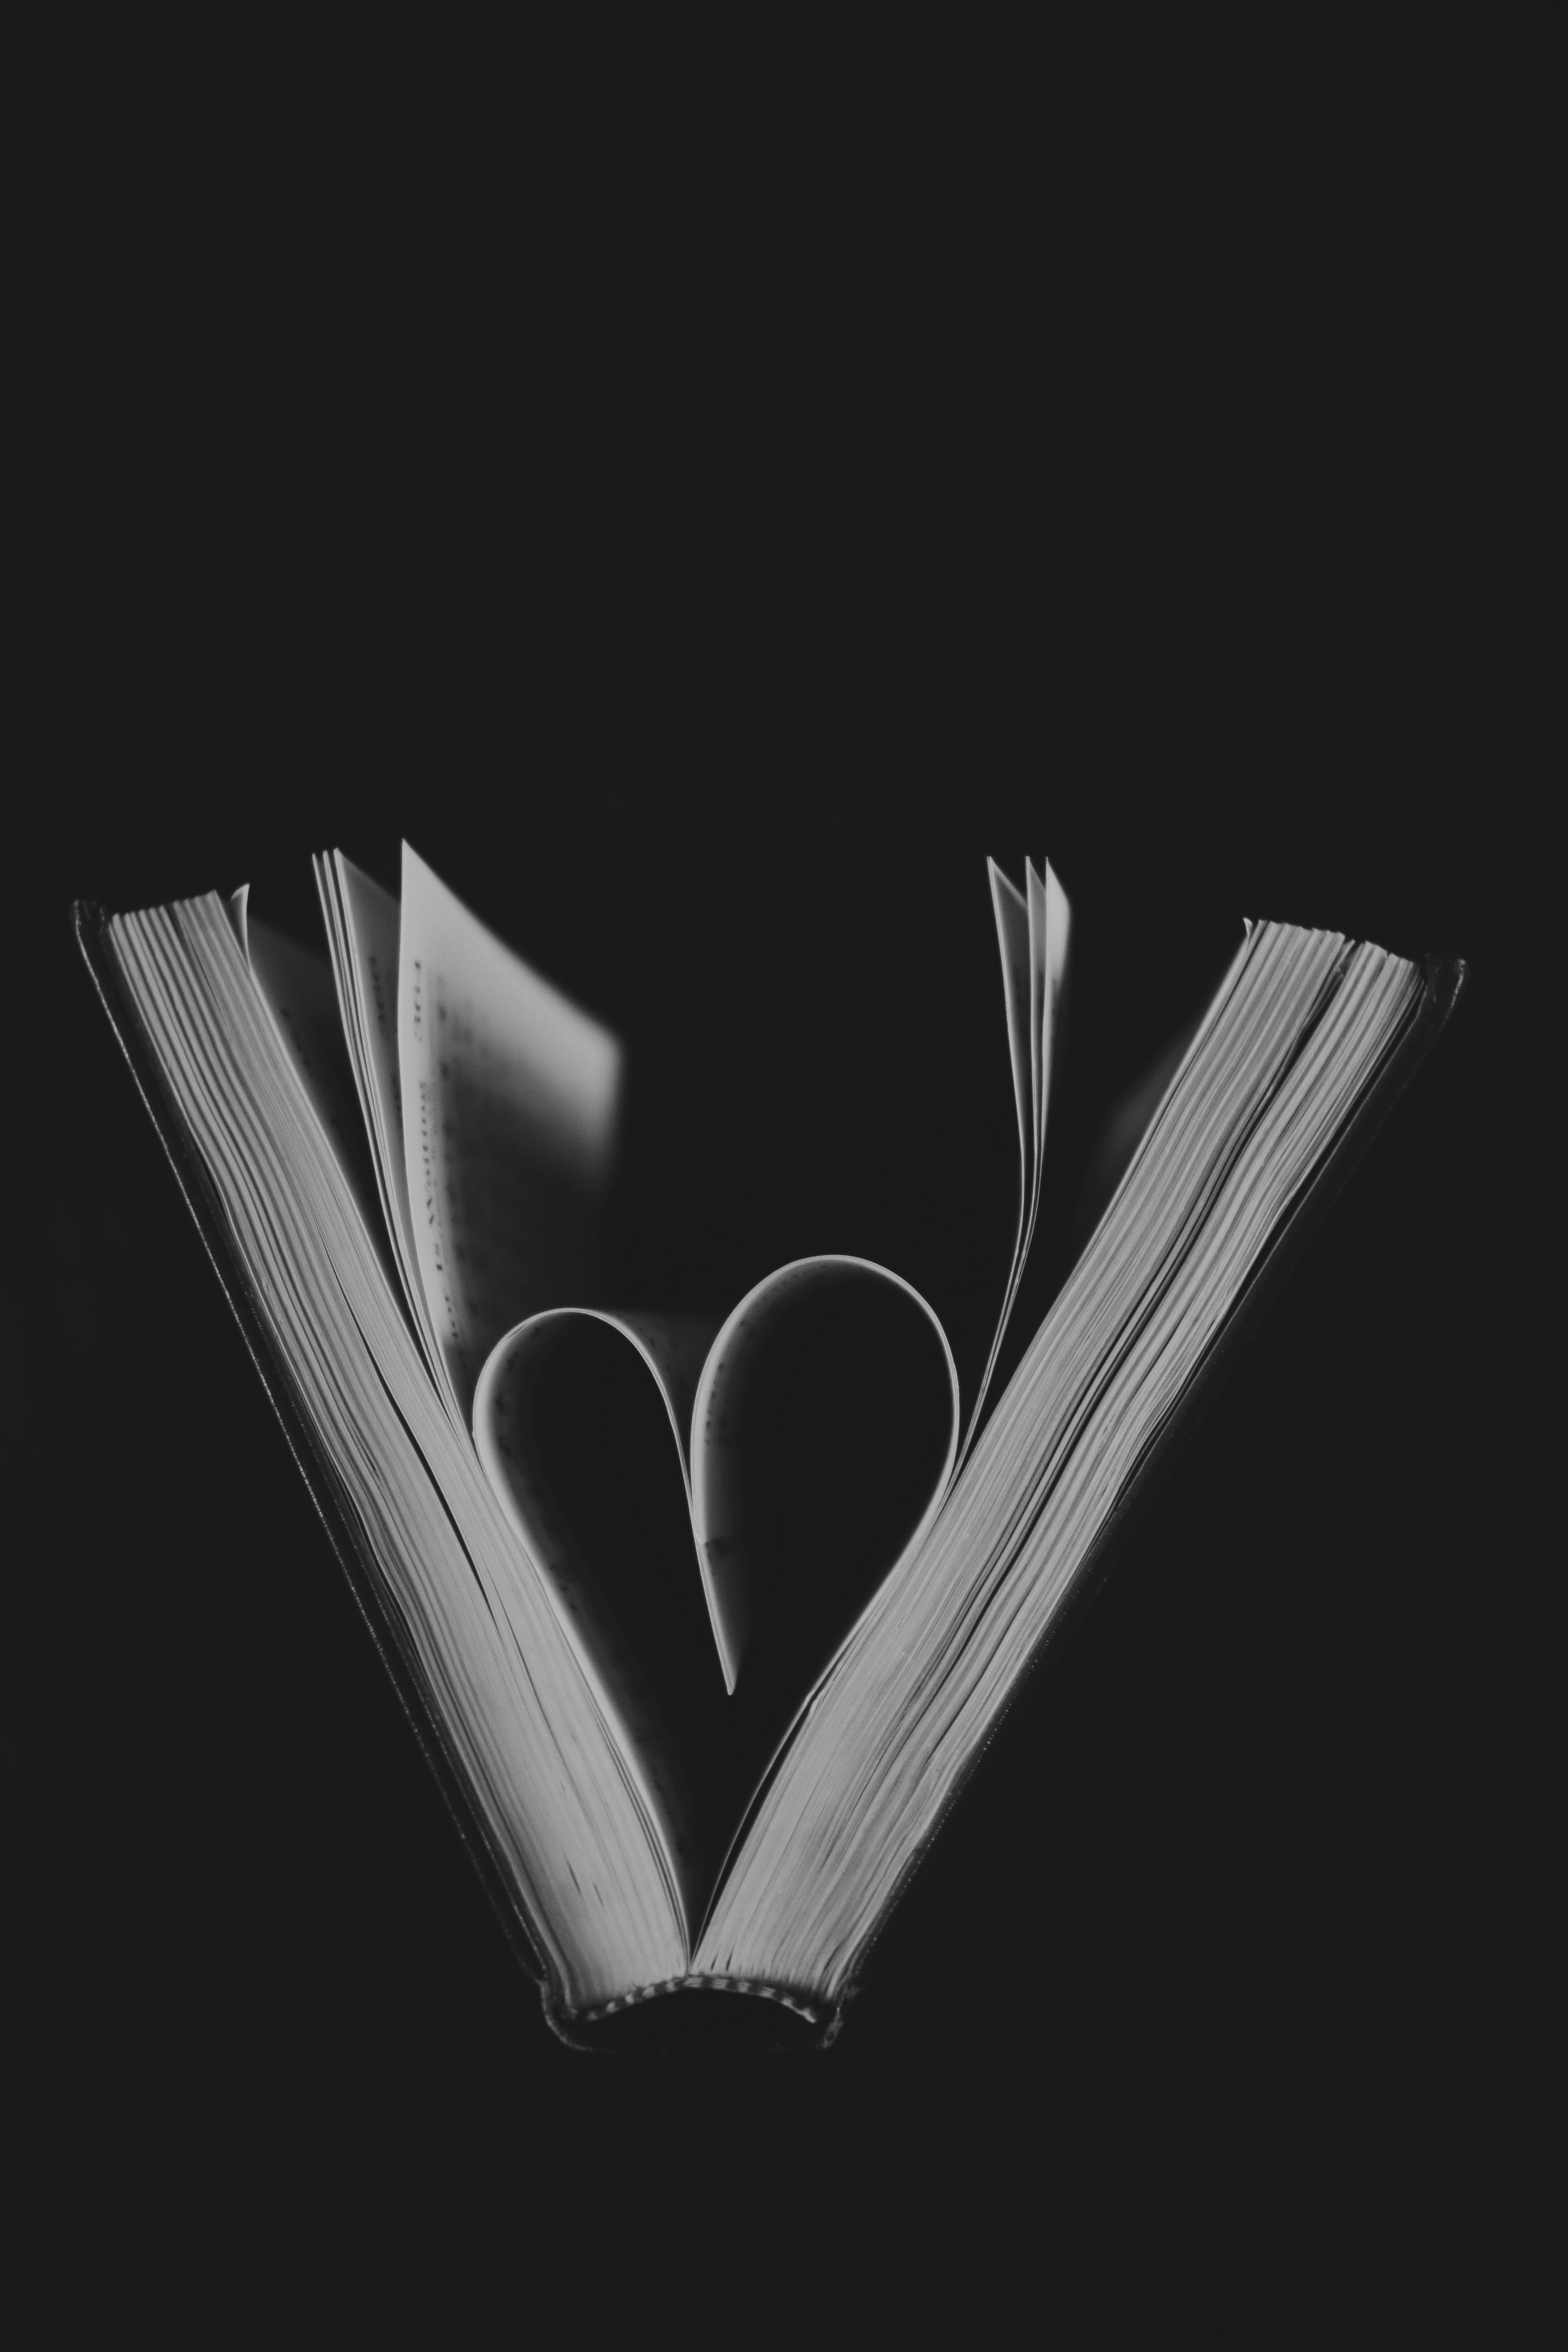 Heart created from sheet of book against black background · Free Stock Photo